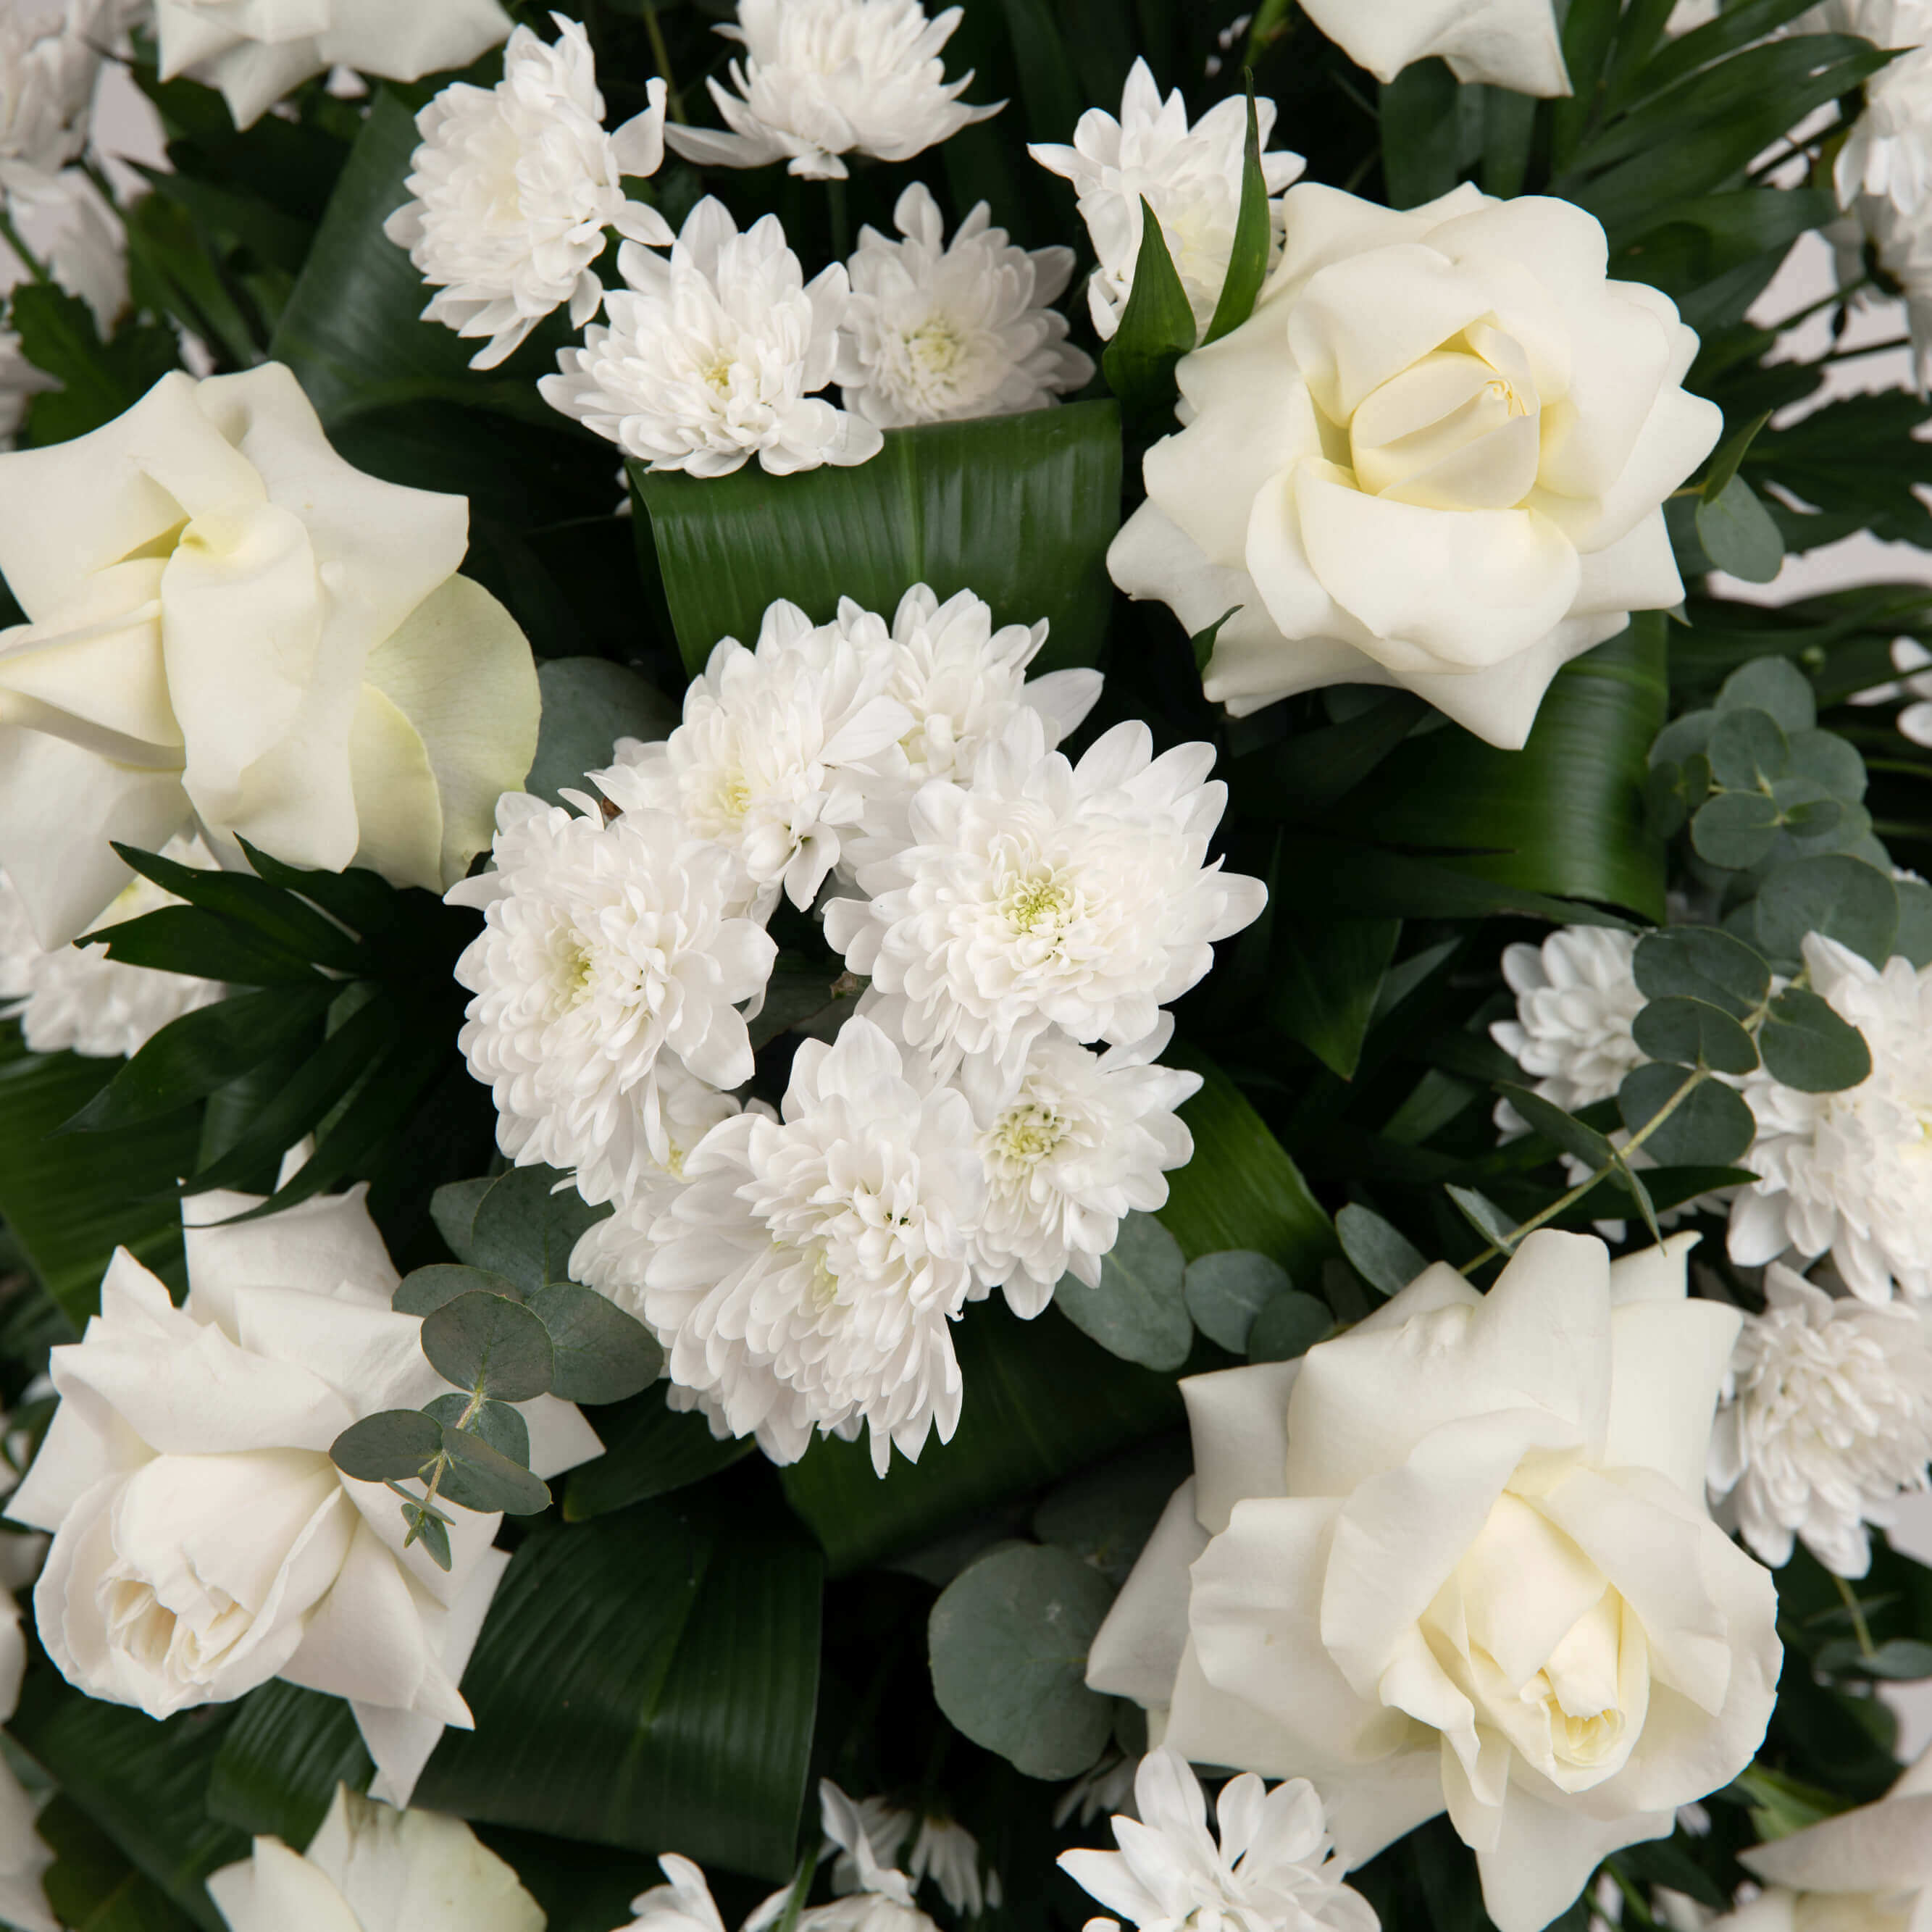 Grass with white roses and chrysanthemums